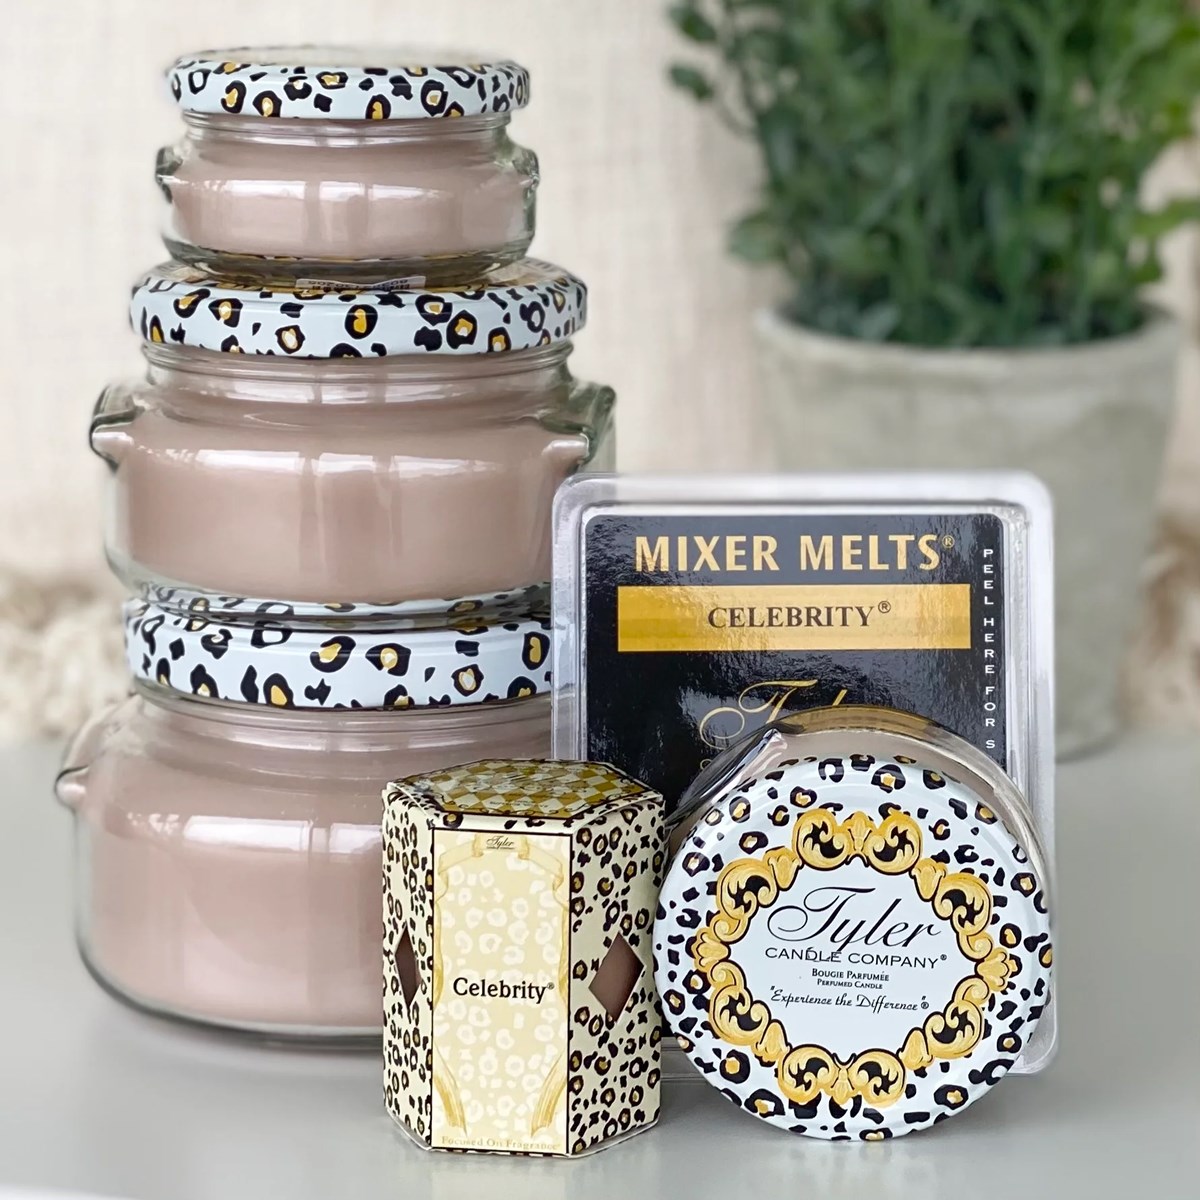 Where To Buy Tyler Candle Company Products Near Me